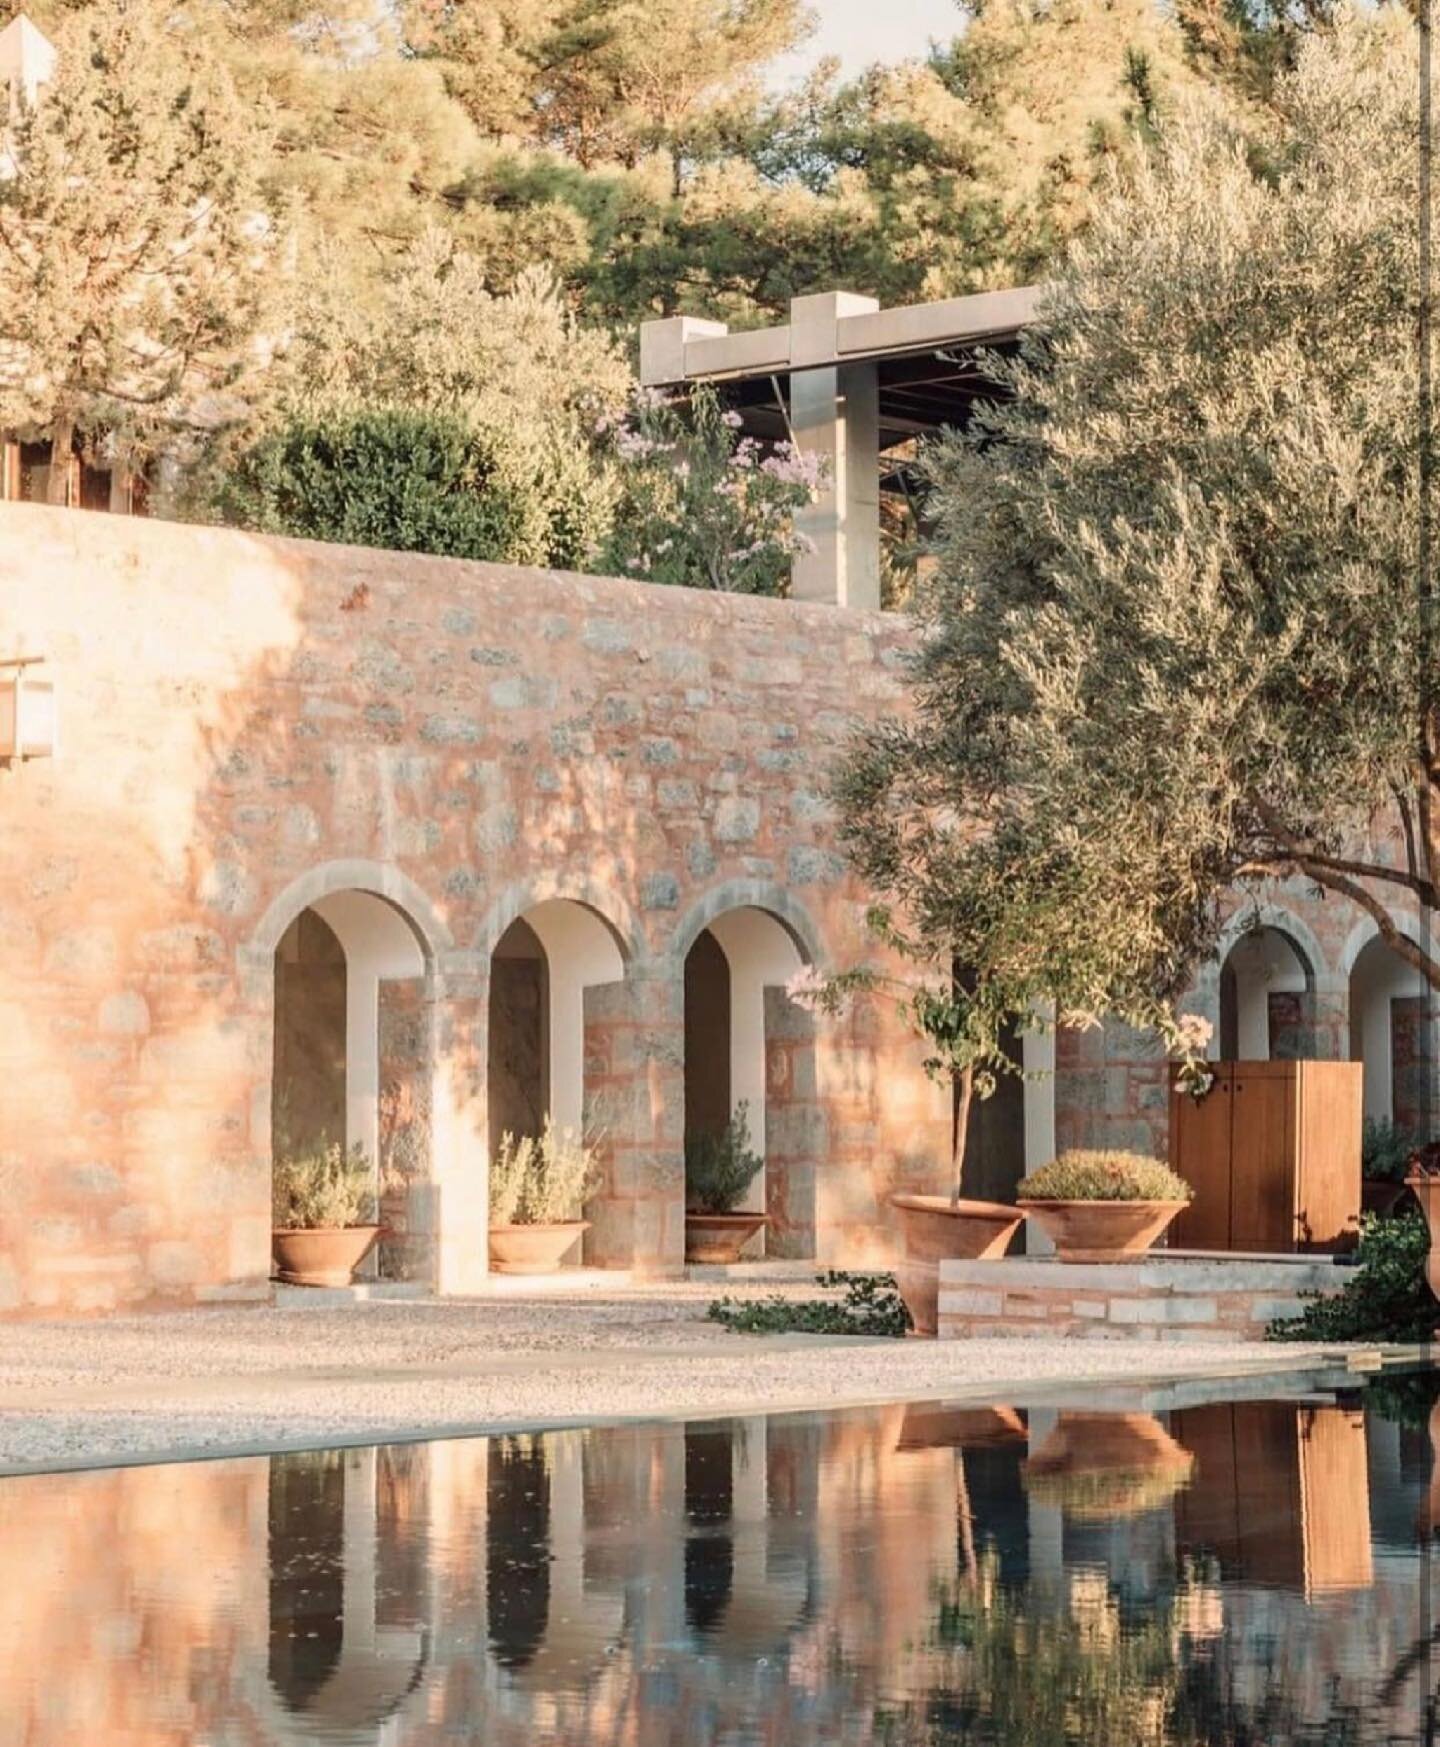 A true oasis nestled between olive groves and cypress trees, resting on the serene coasts of Turkey. @amanruya 
.
.
.
.
.
.
#ambiancecurator #ambiance #lifedesign #travel #traveldiaries #travelfeed #travelculture